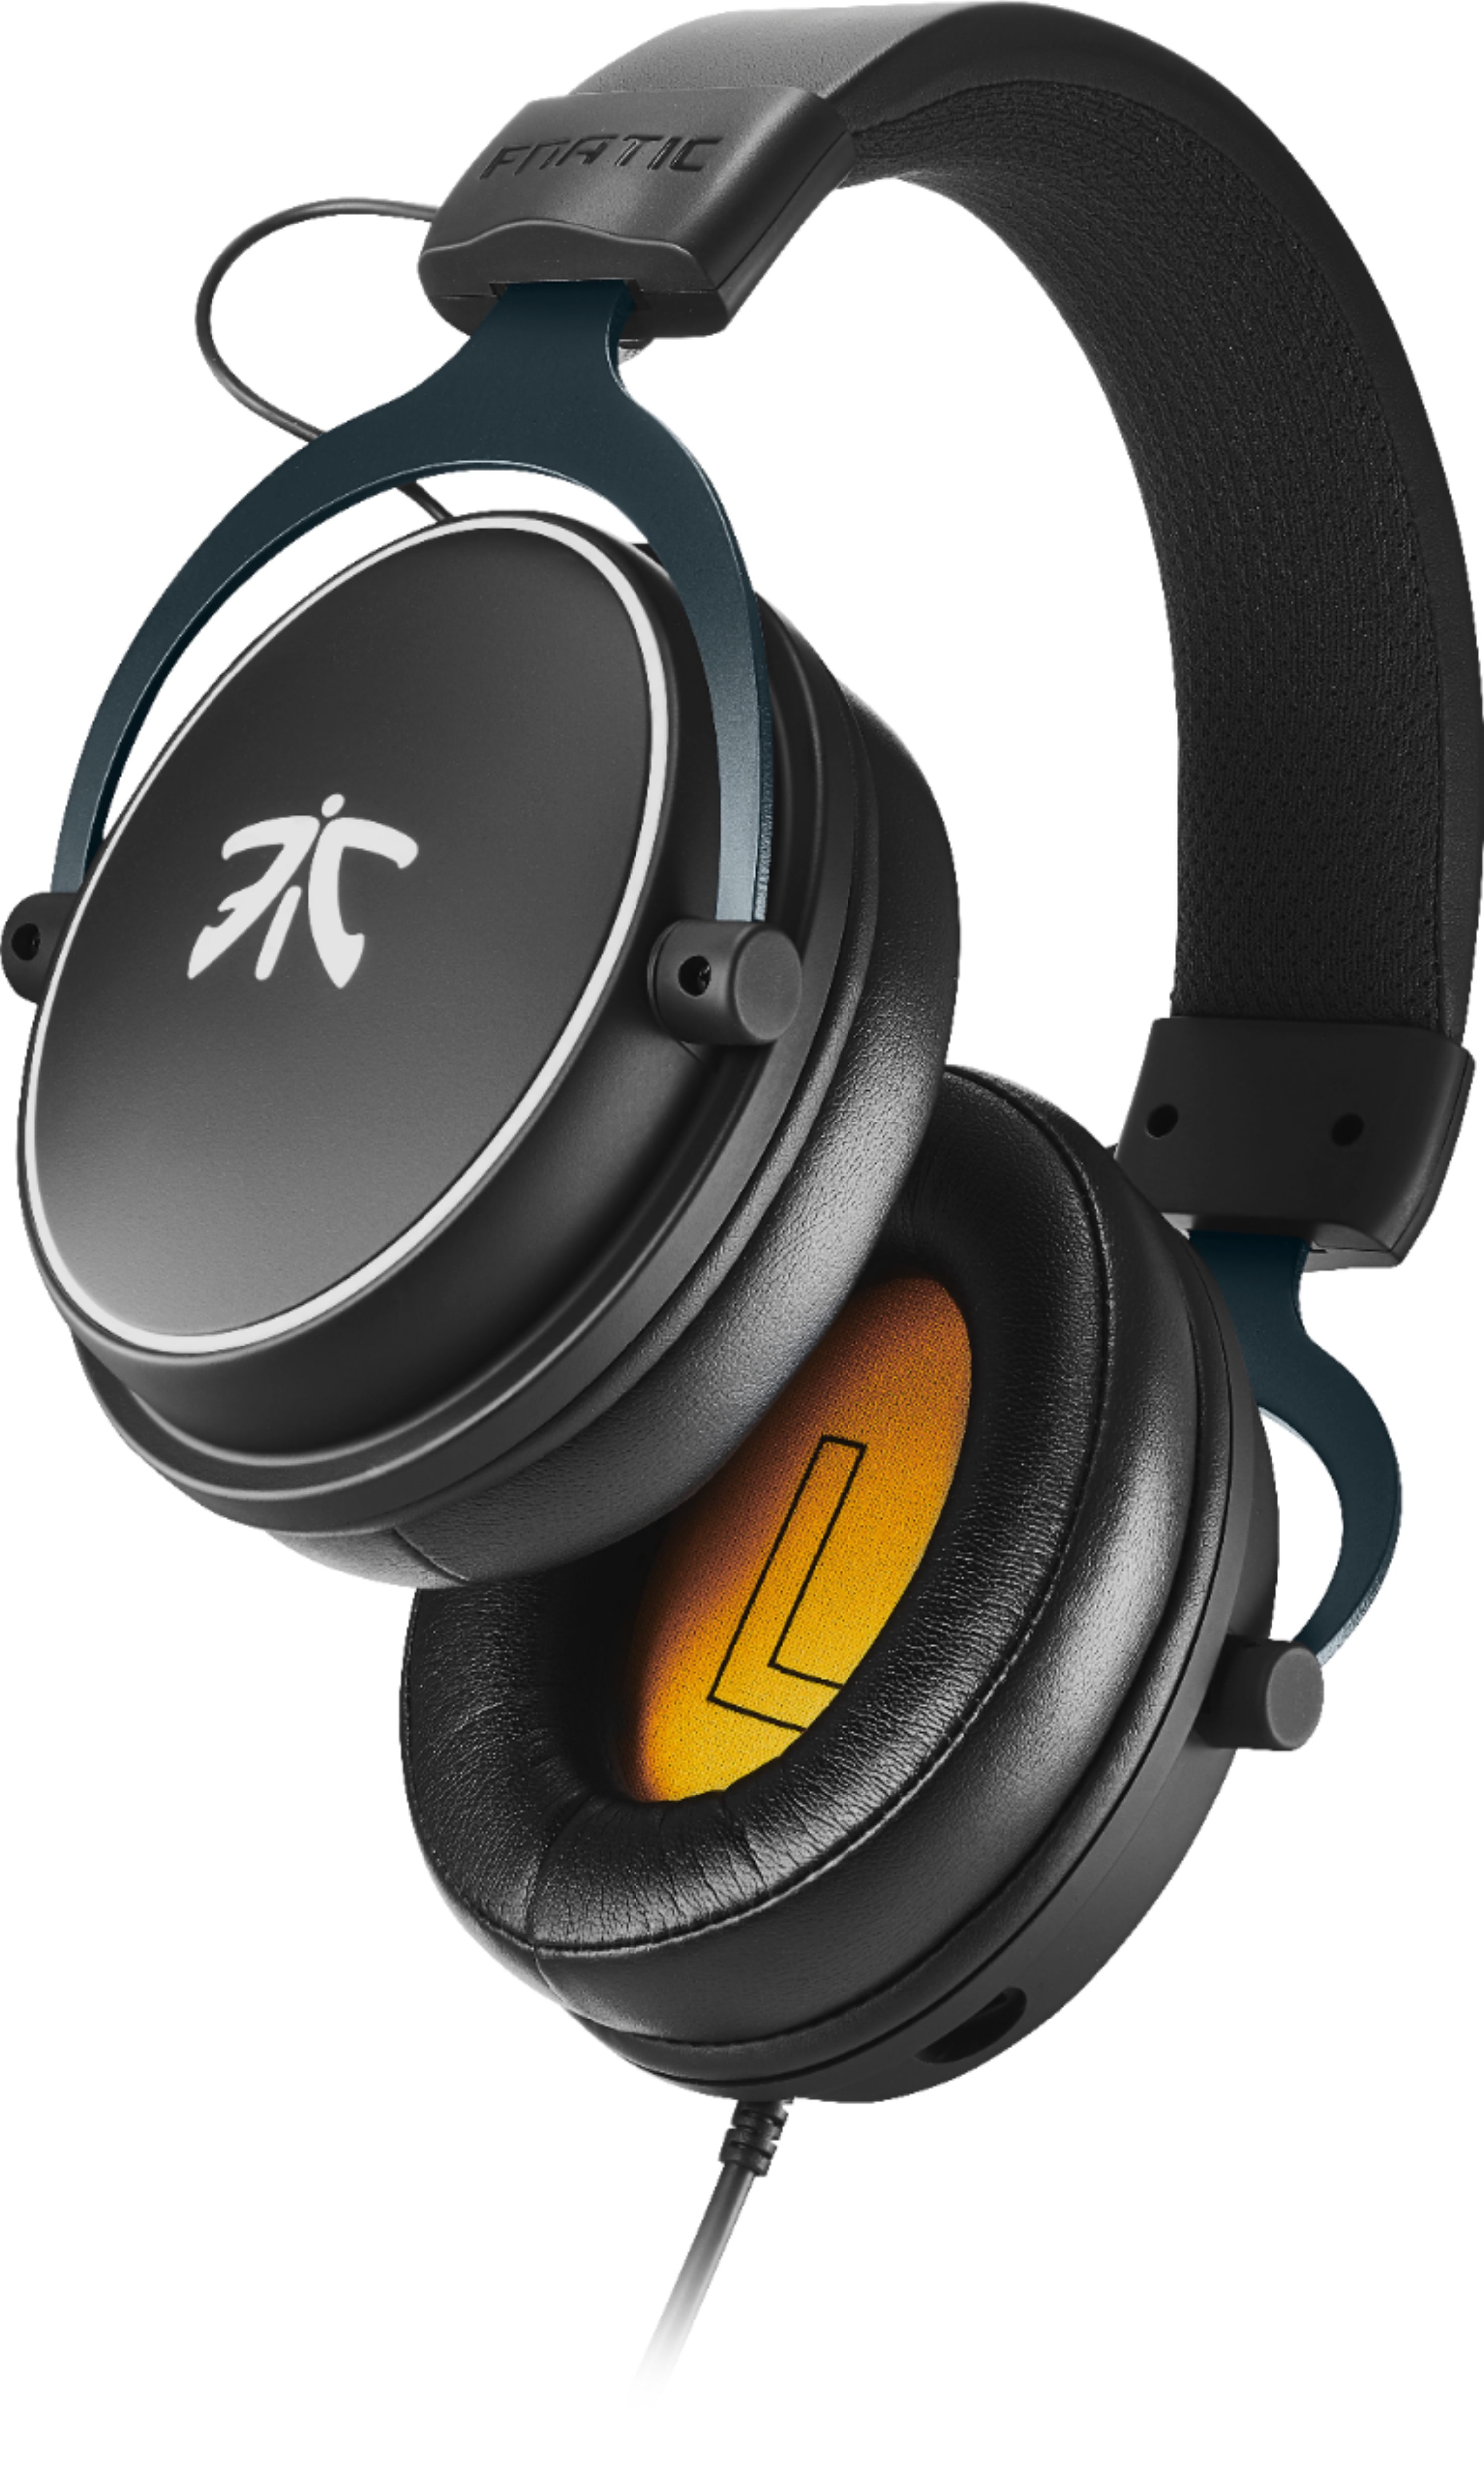 Fnatic React Gaming Headset for Esports with 53mm Drivers Metal